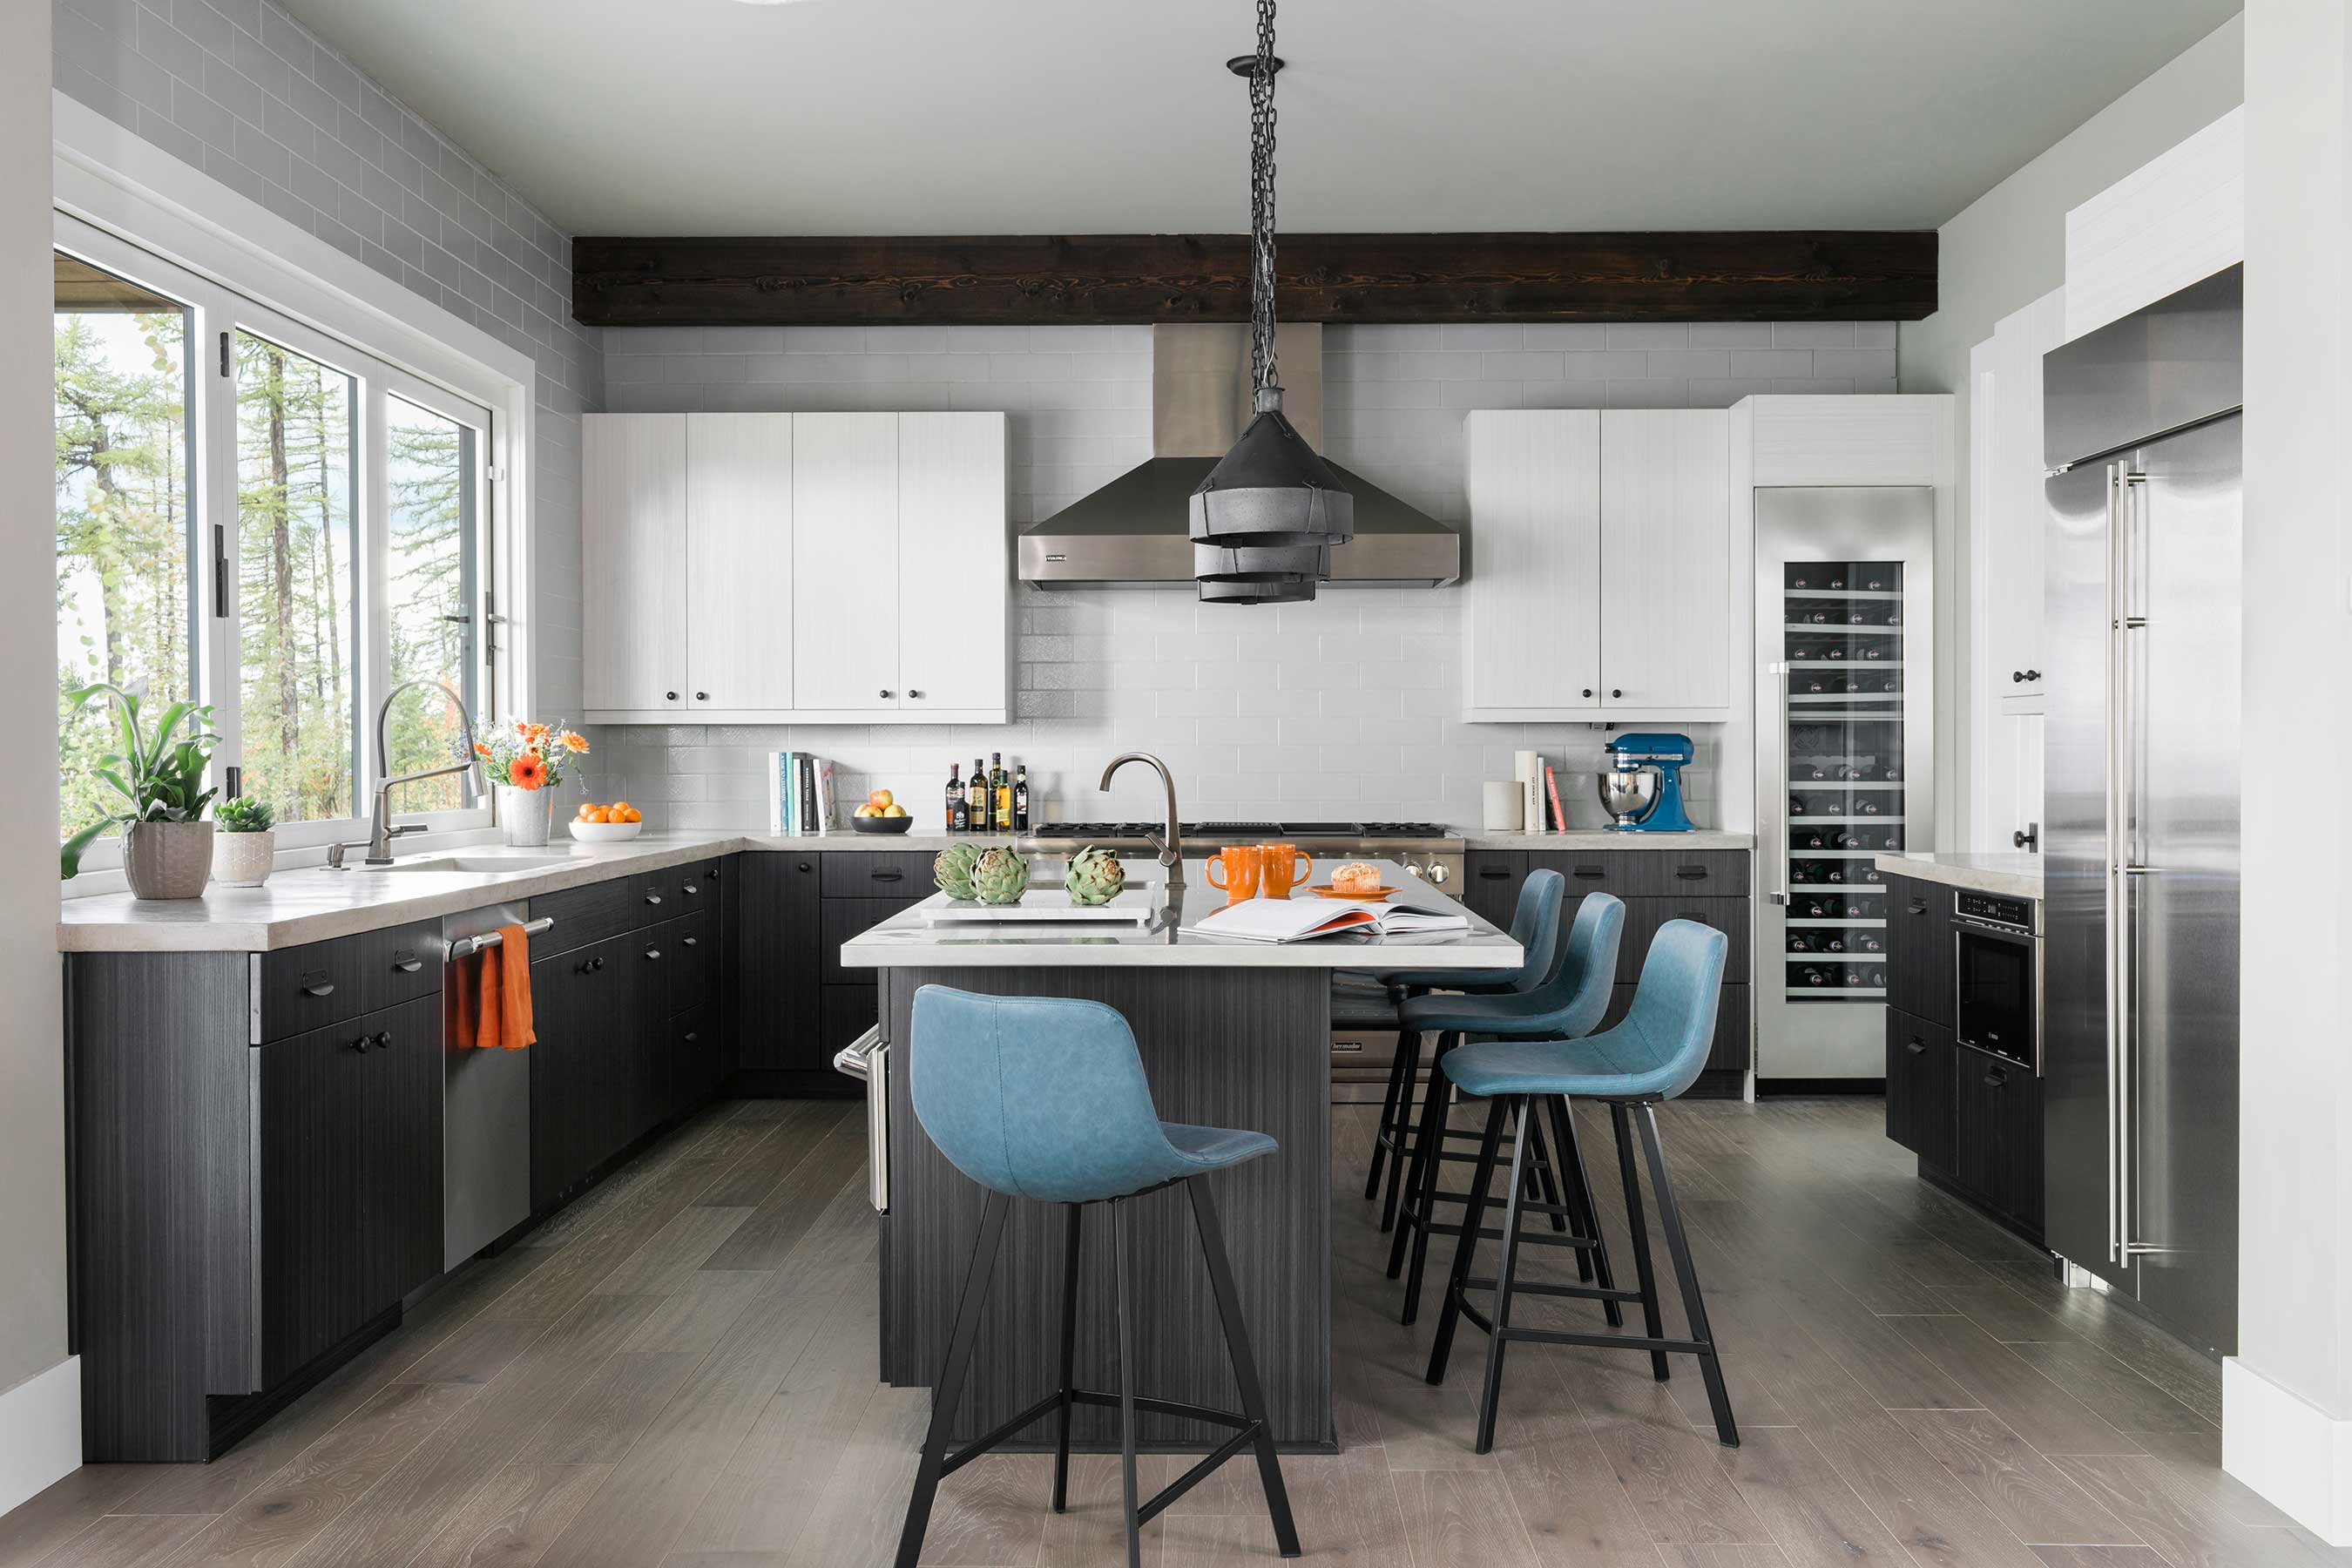 HGTV Unveils Its Largest Giveaway Ever: The Stunning HGTV Dream Home